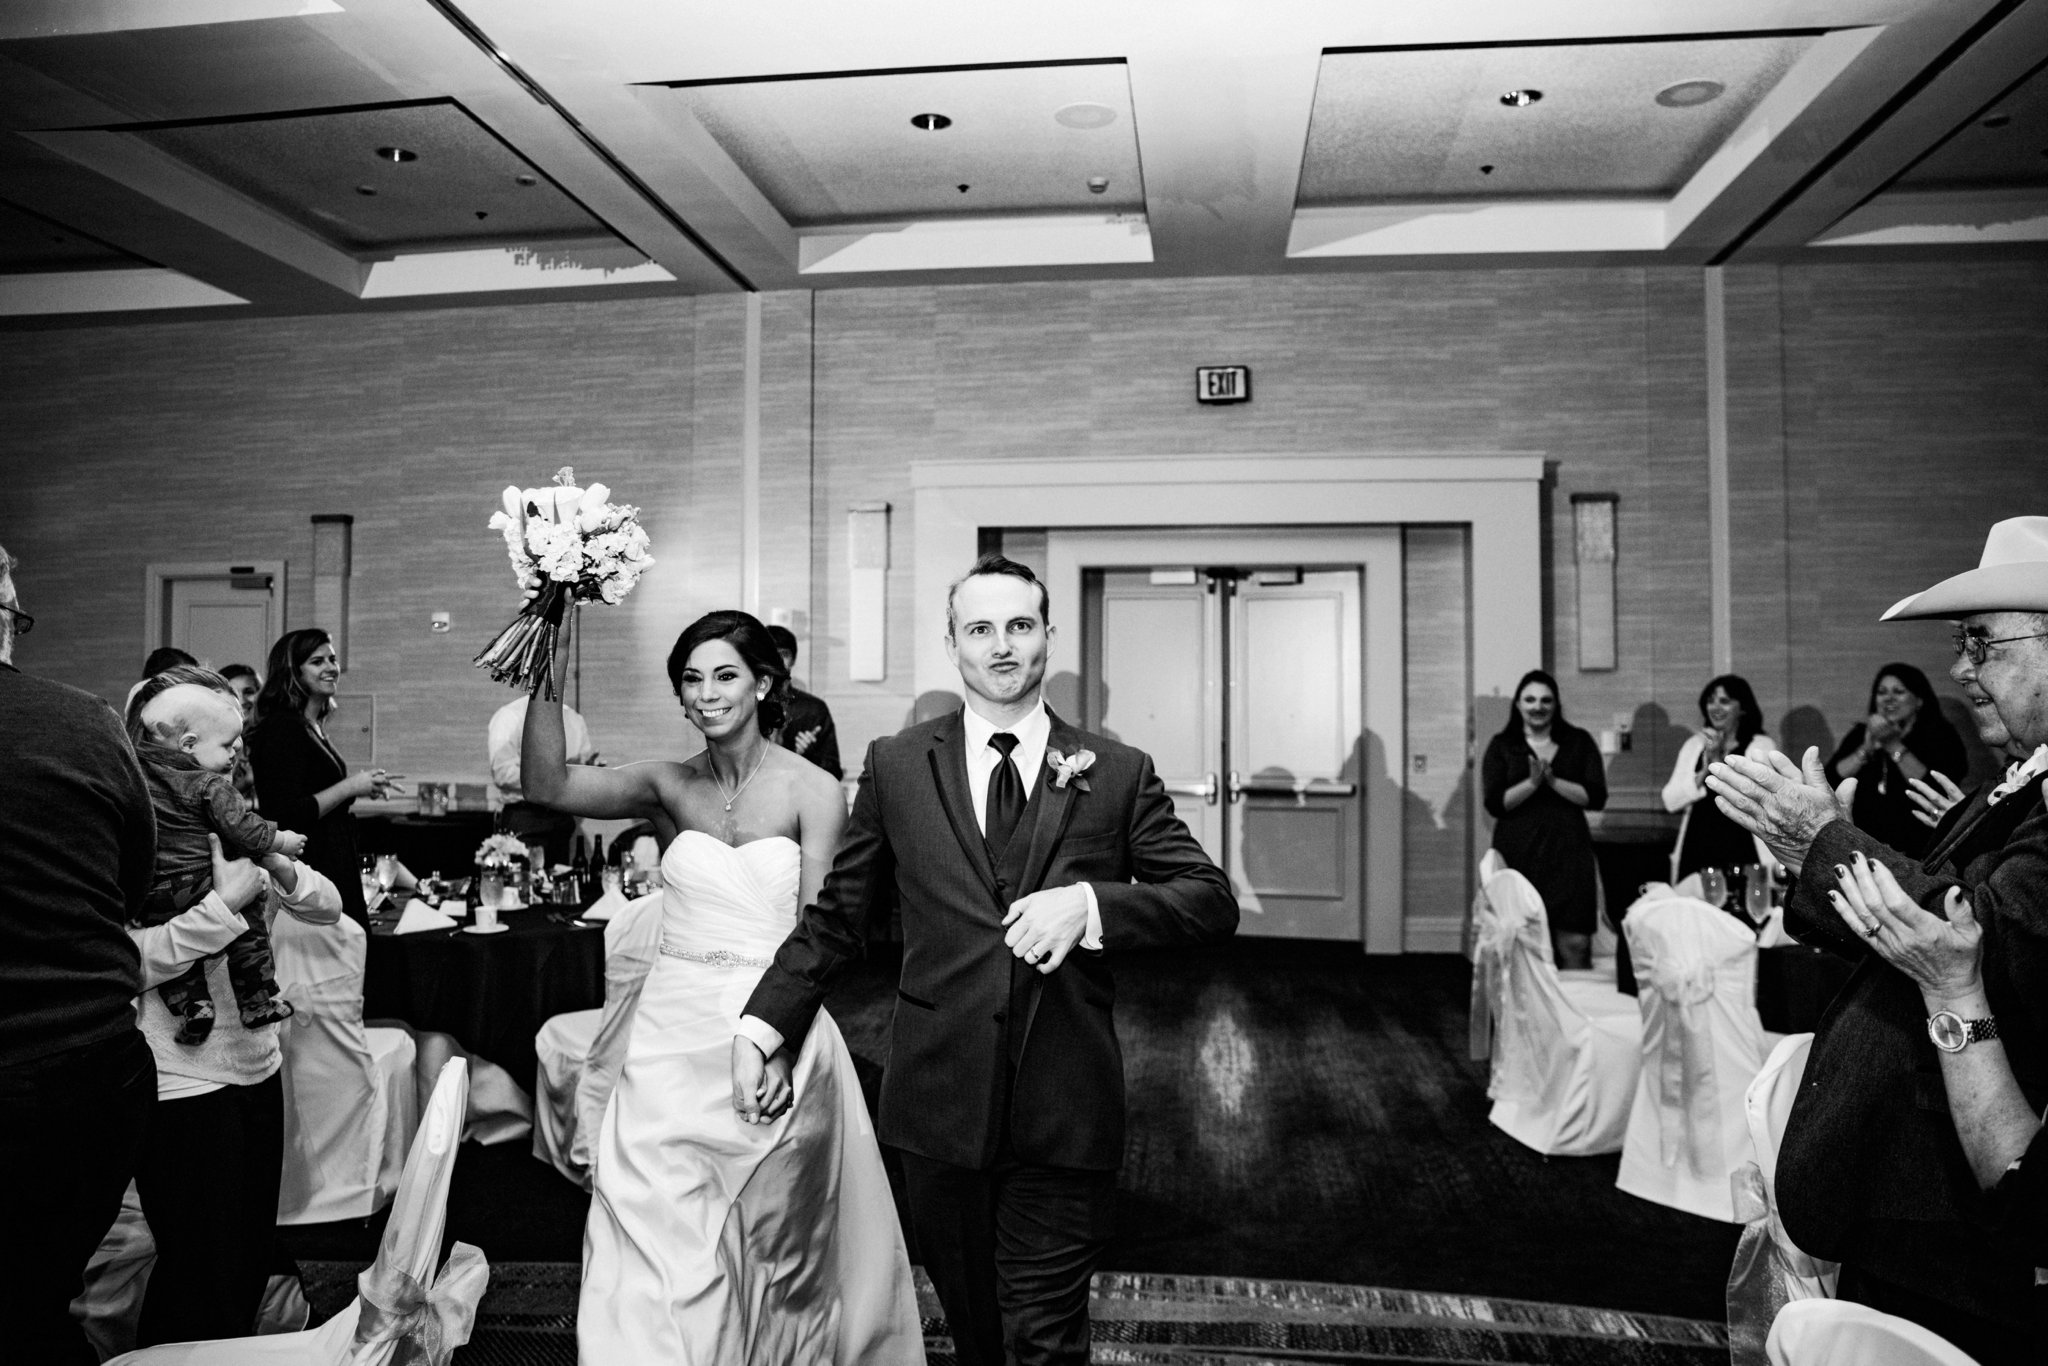 black and white | wedding | wedding photos | wedding photography | images by feliciathephotographer.com | Country Club Plaza | Kansas City | The Marriott | Unity Temple | reception venue | bride and groom entrance | Mr. and Mrs. 